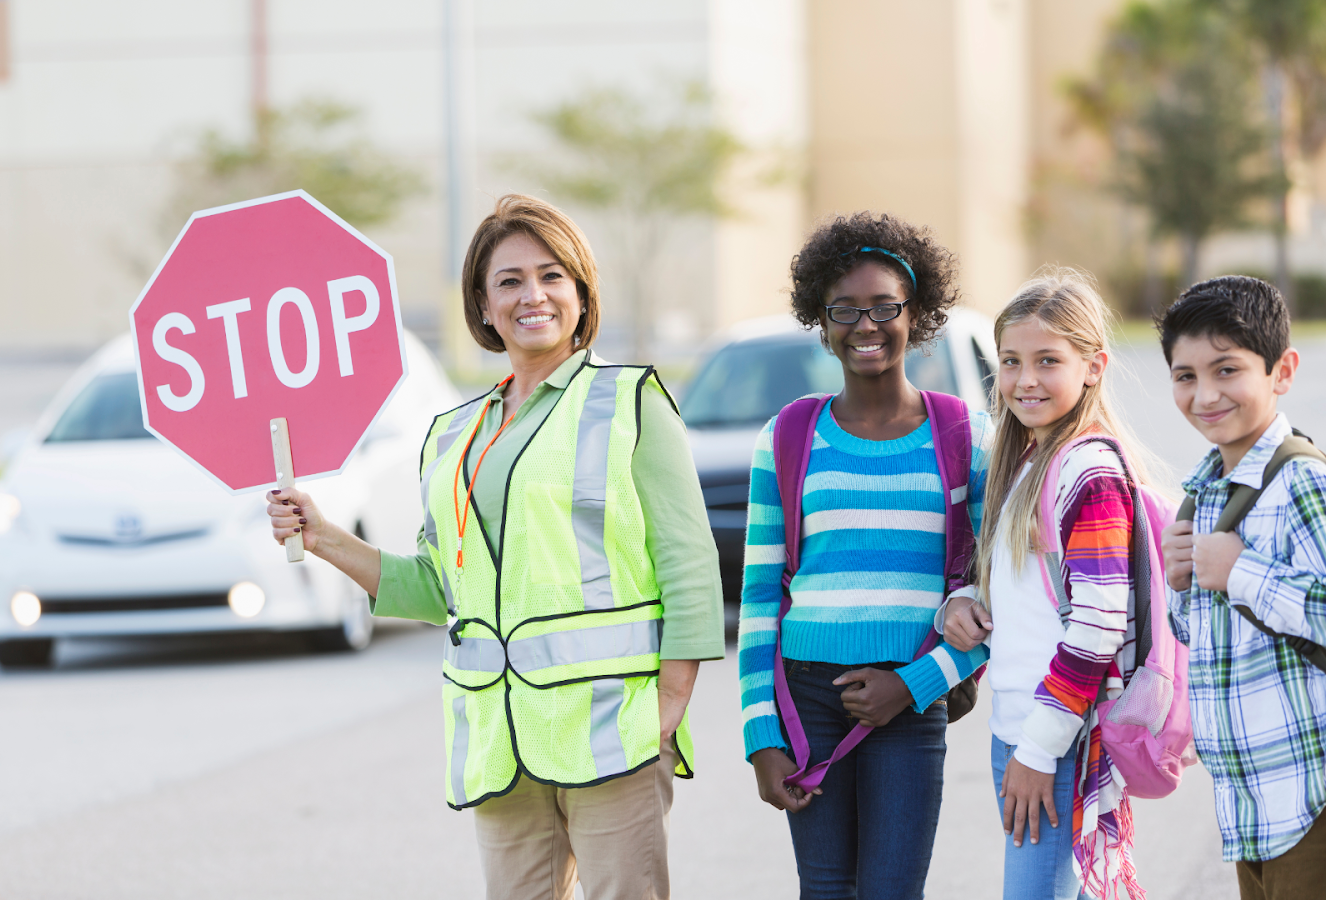 A crossing guard holding a "STOP" sign with children nearby.